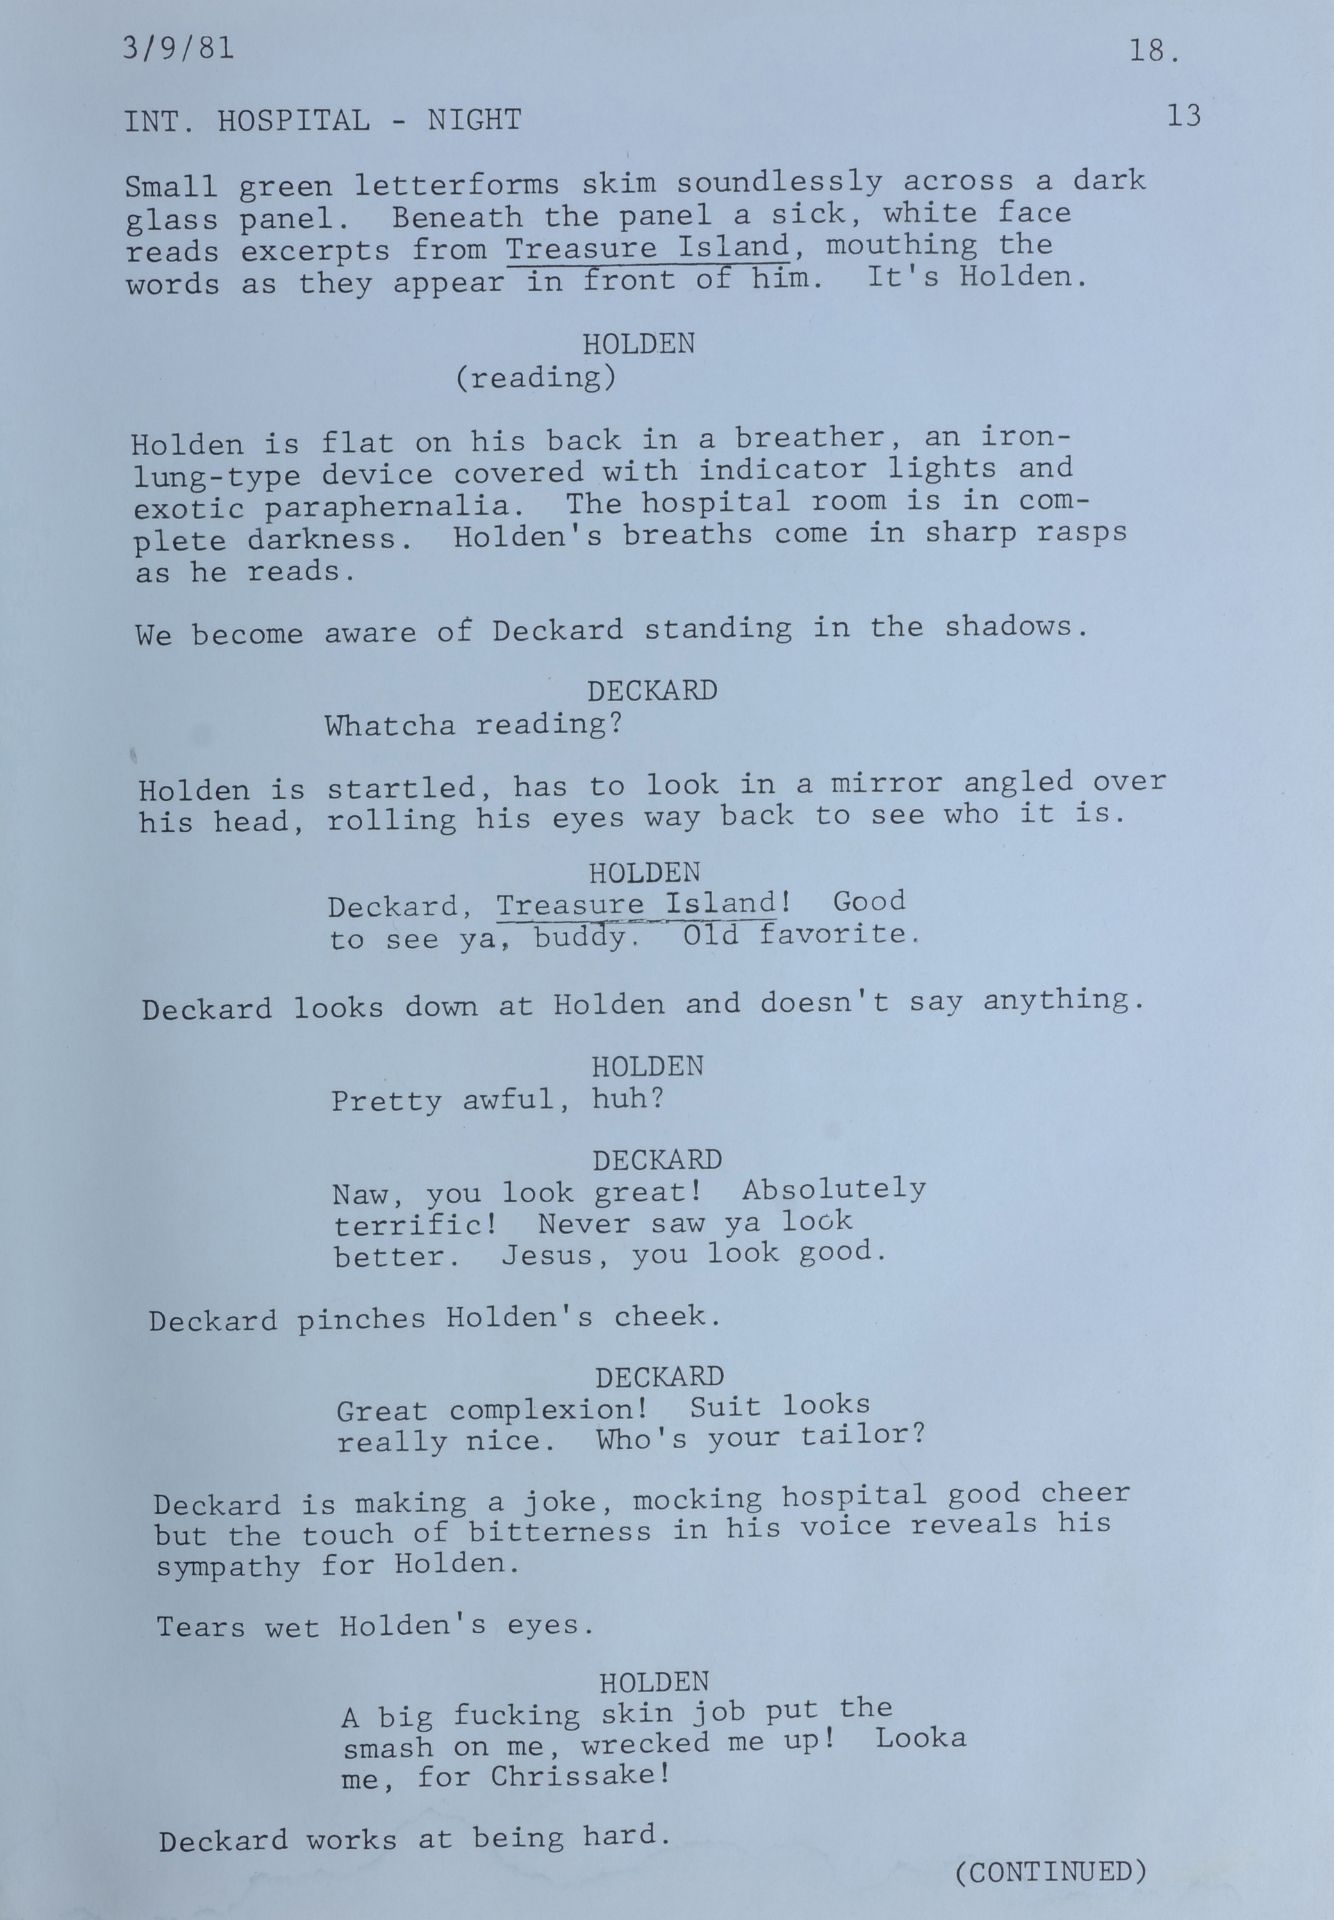 BLADE RUNNER (1982) - Producer's Assistant, Victoria Ewart's Personal Script - Image 5 of 8